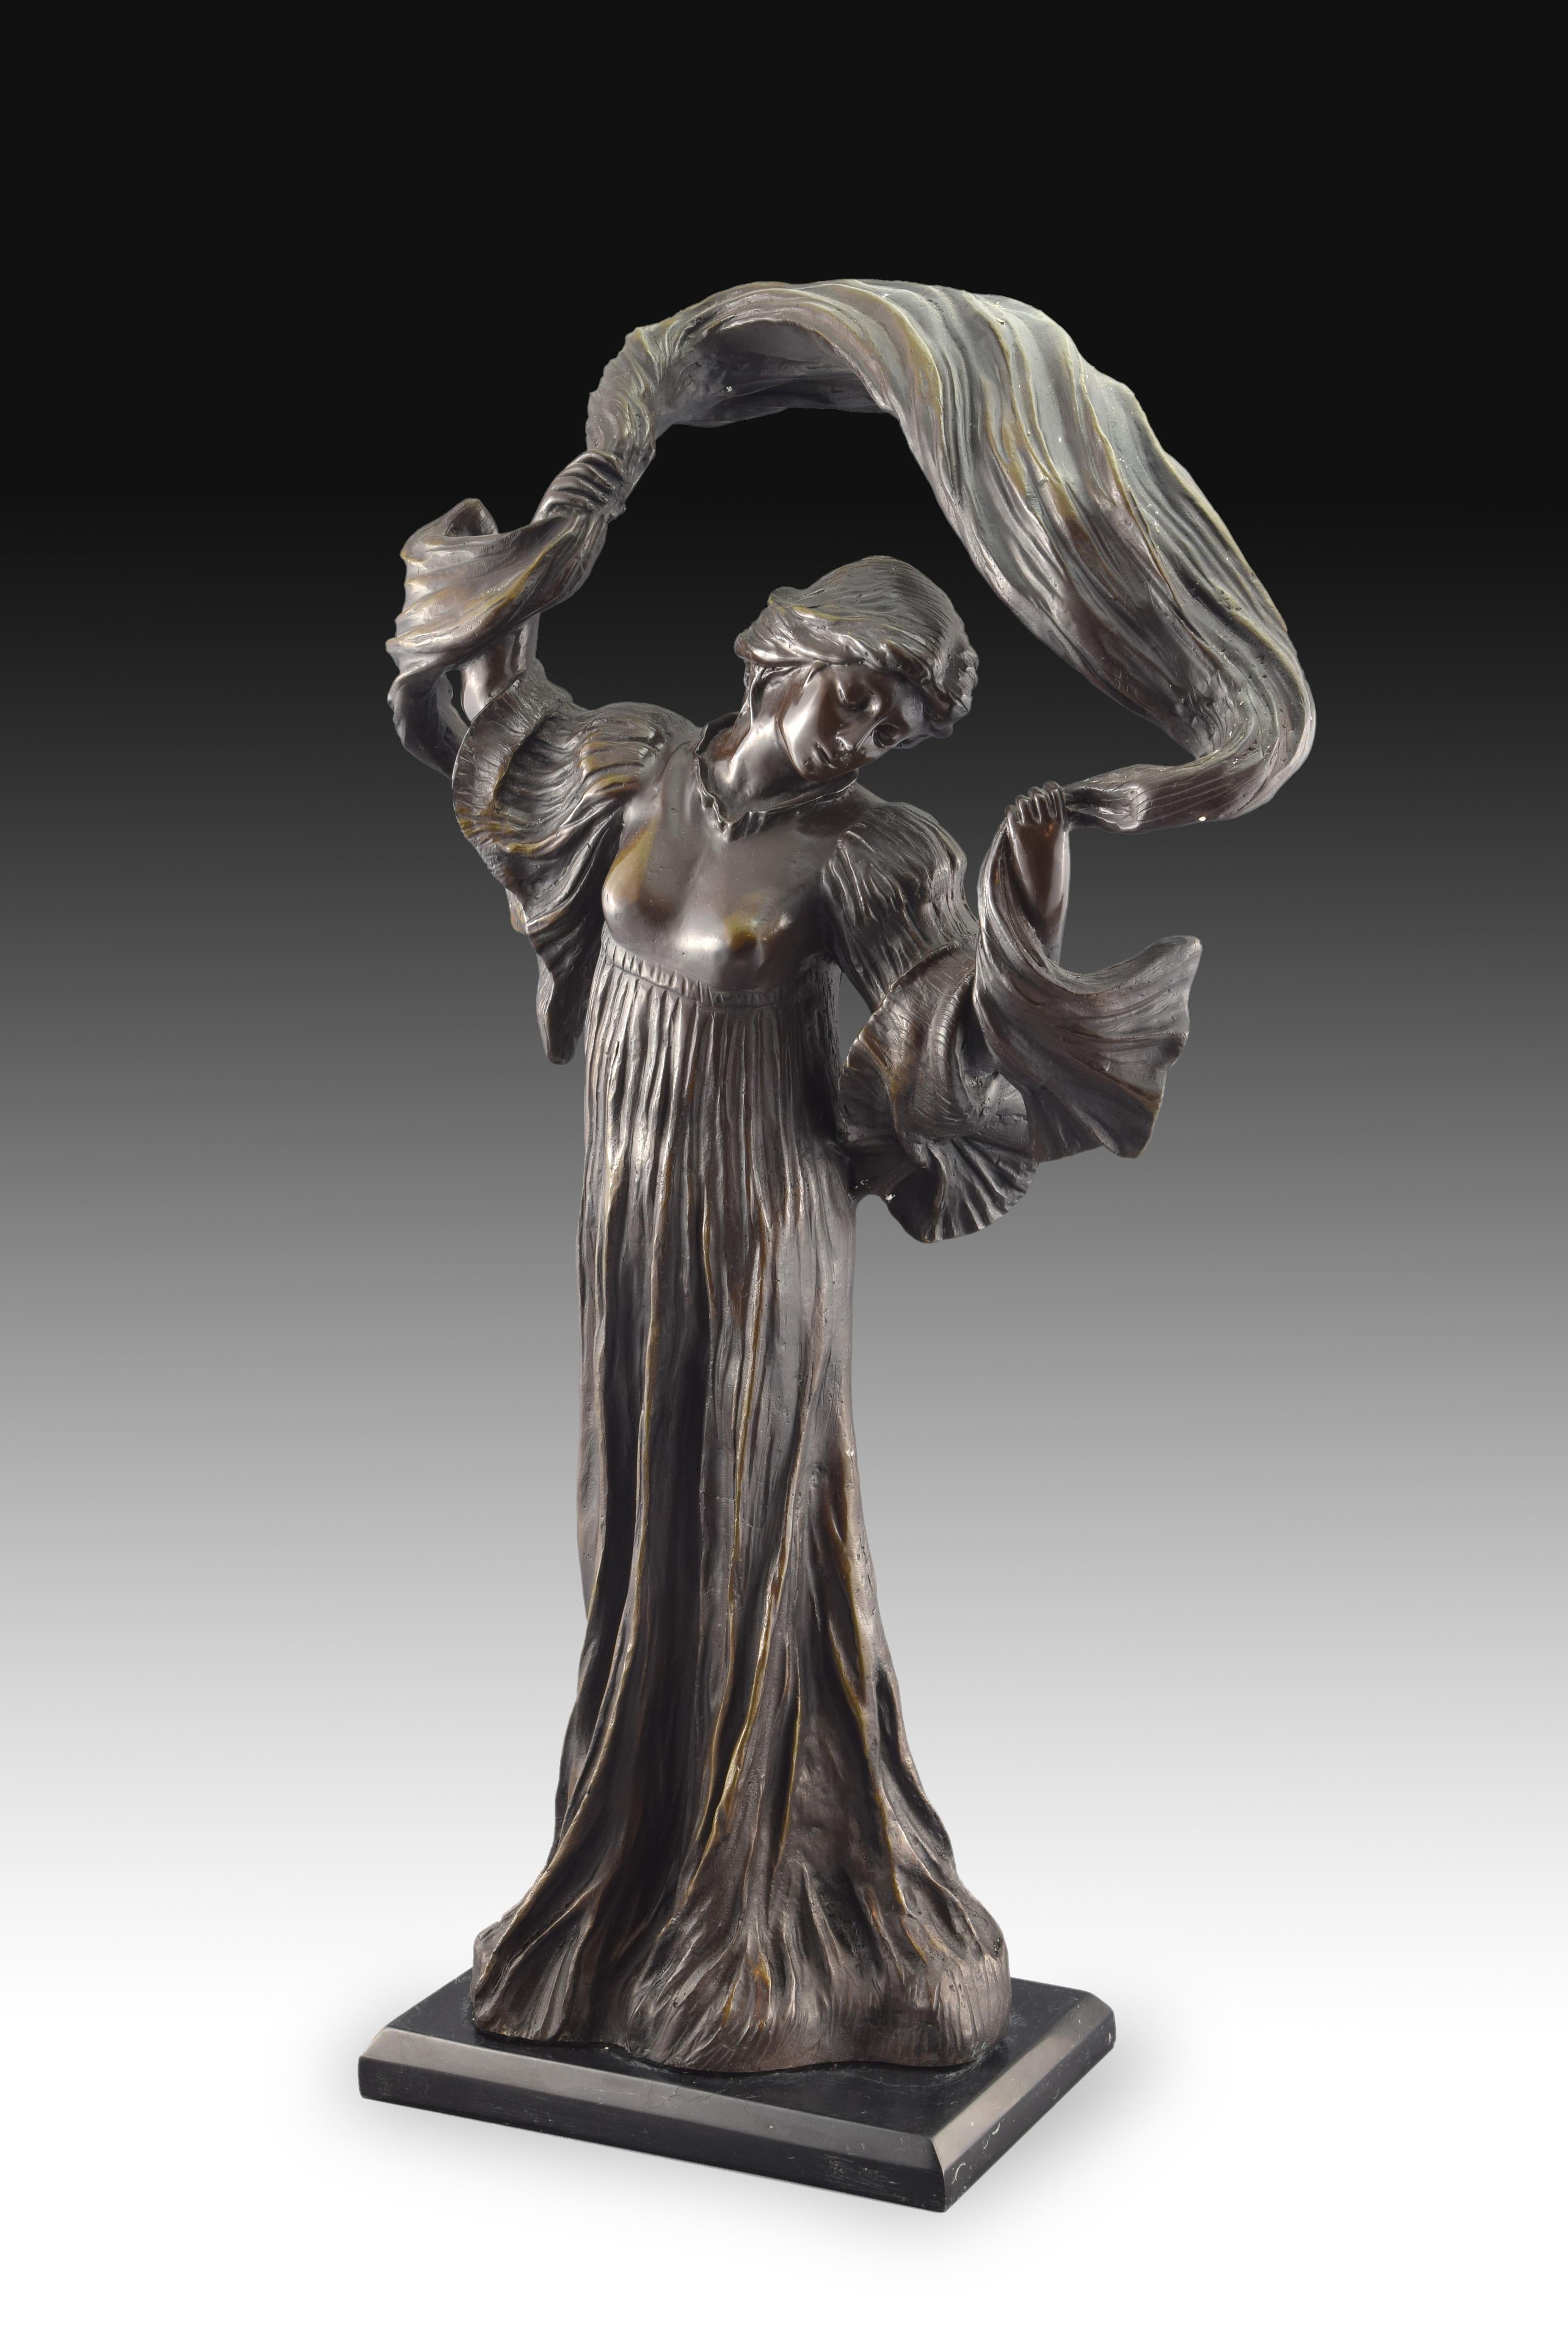 On a small rectangular base stands the female figure, who appears dressed in an outfit that reaches the ground, with long and moved sleeves and the bust closest to the body, and waving a shawl over her head. This piece is inspired by a well-known